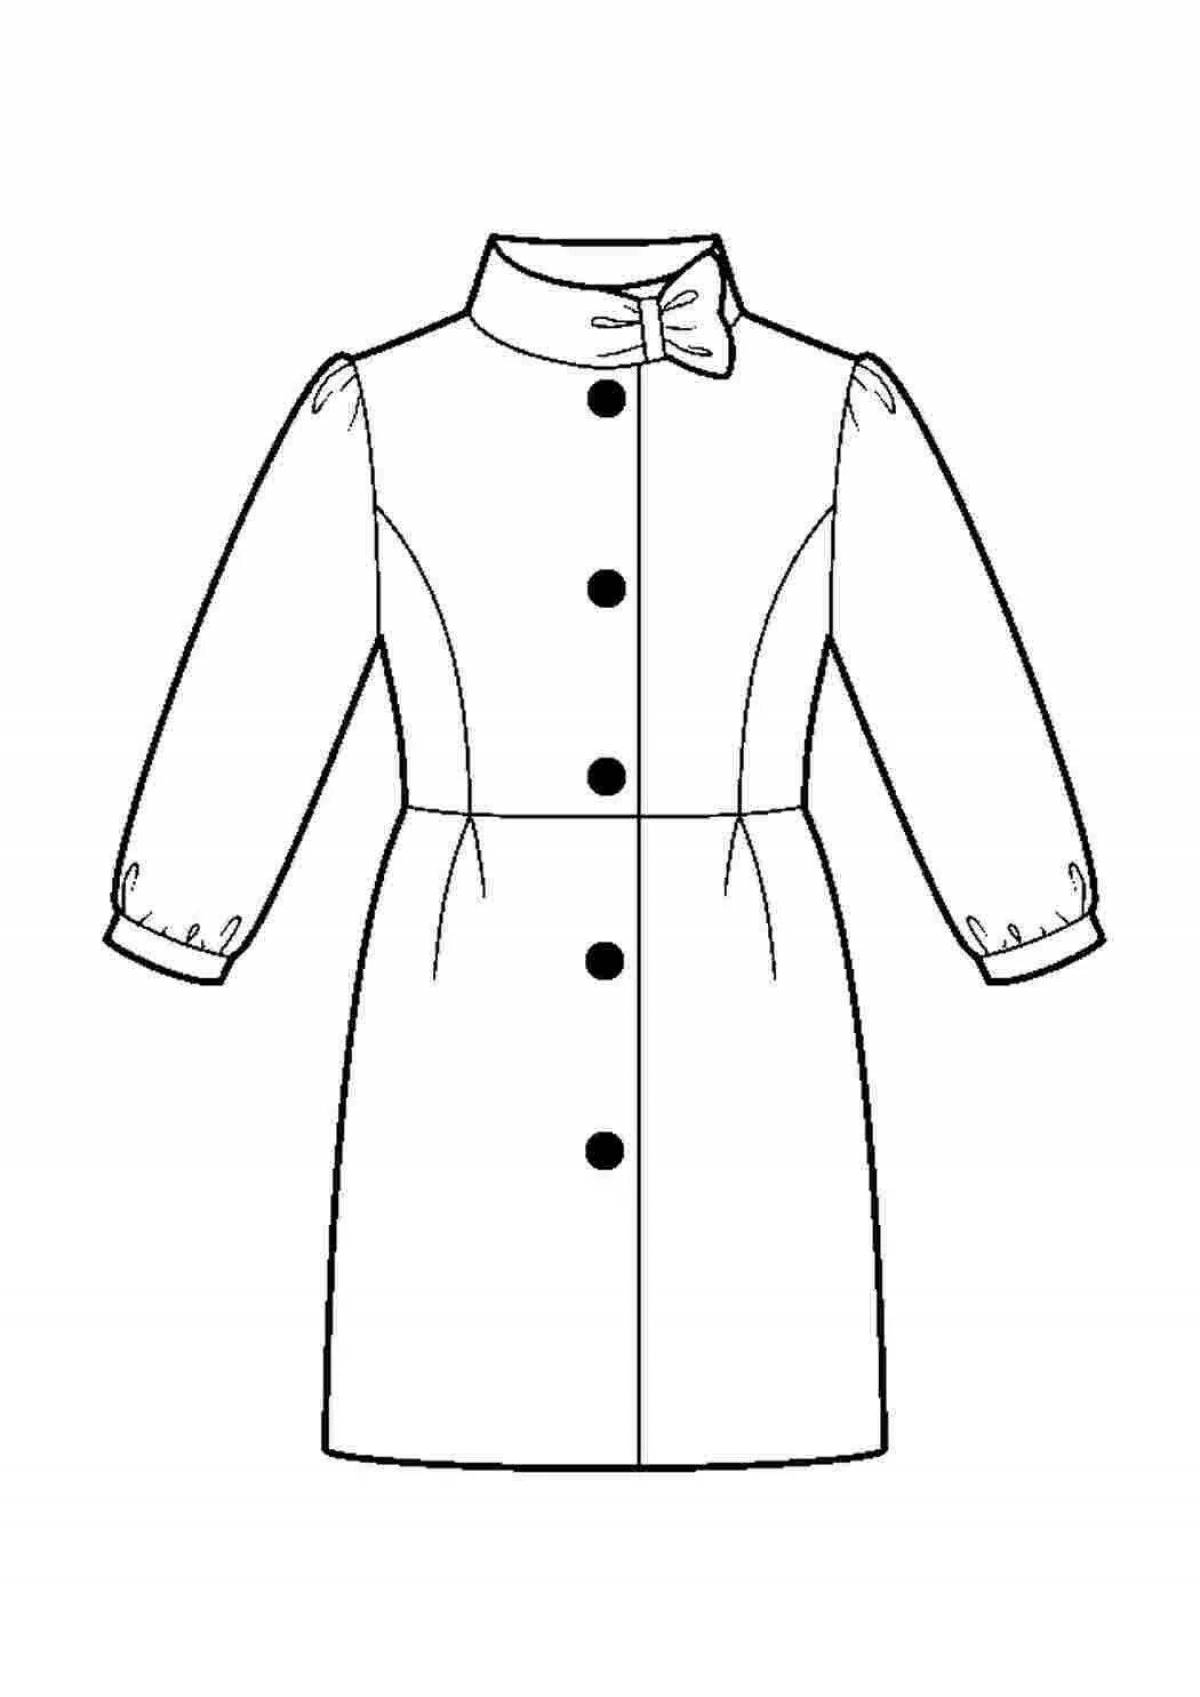 Luxury raincoat coloring page